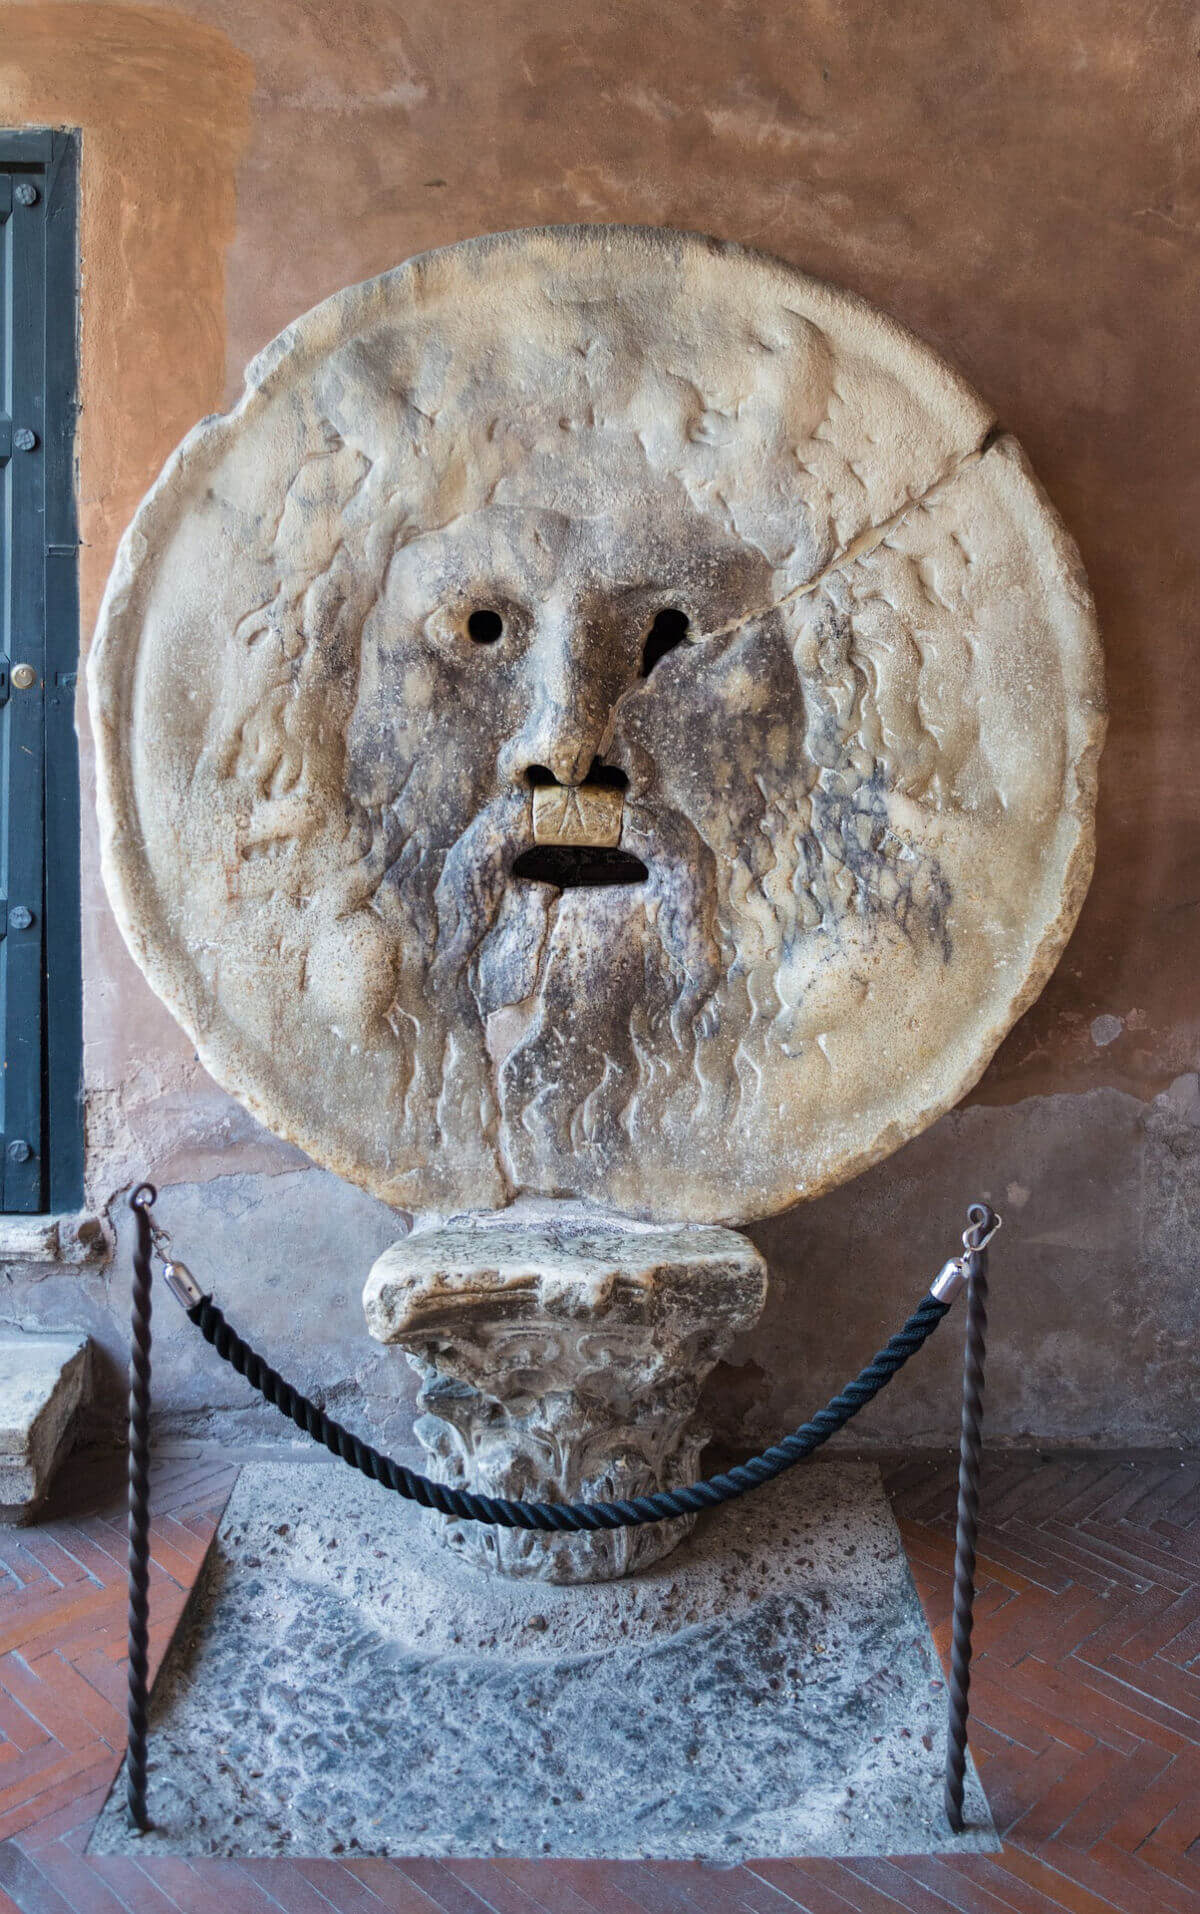 The Mouth of Truth in Rome